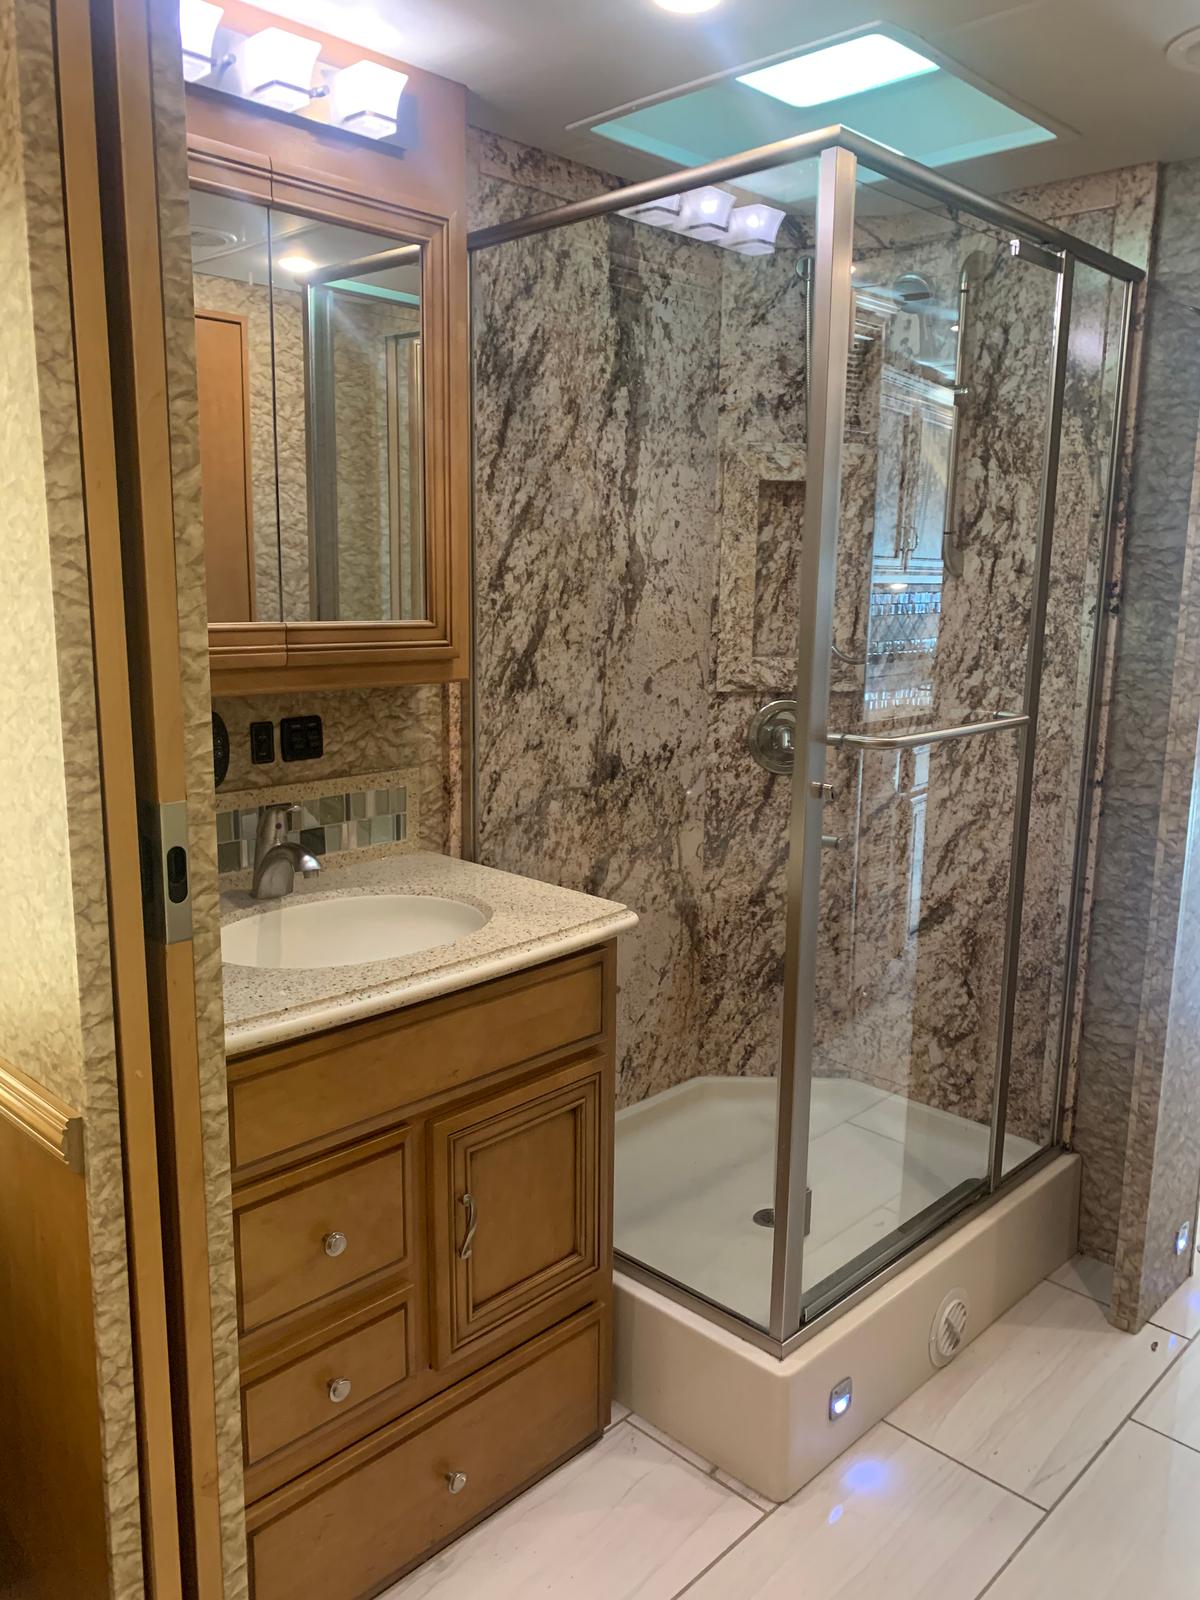 The bathroom of a luxury Ventana model coach made by Newmar, whose parent company is Winnebago. (Susan Taylor Martin/Tampa Bay Times/TNS)